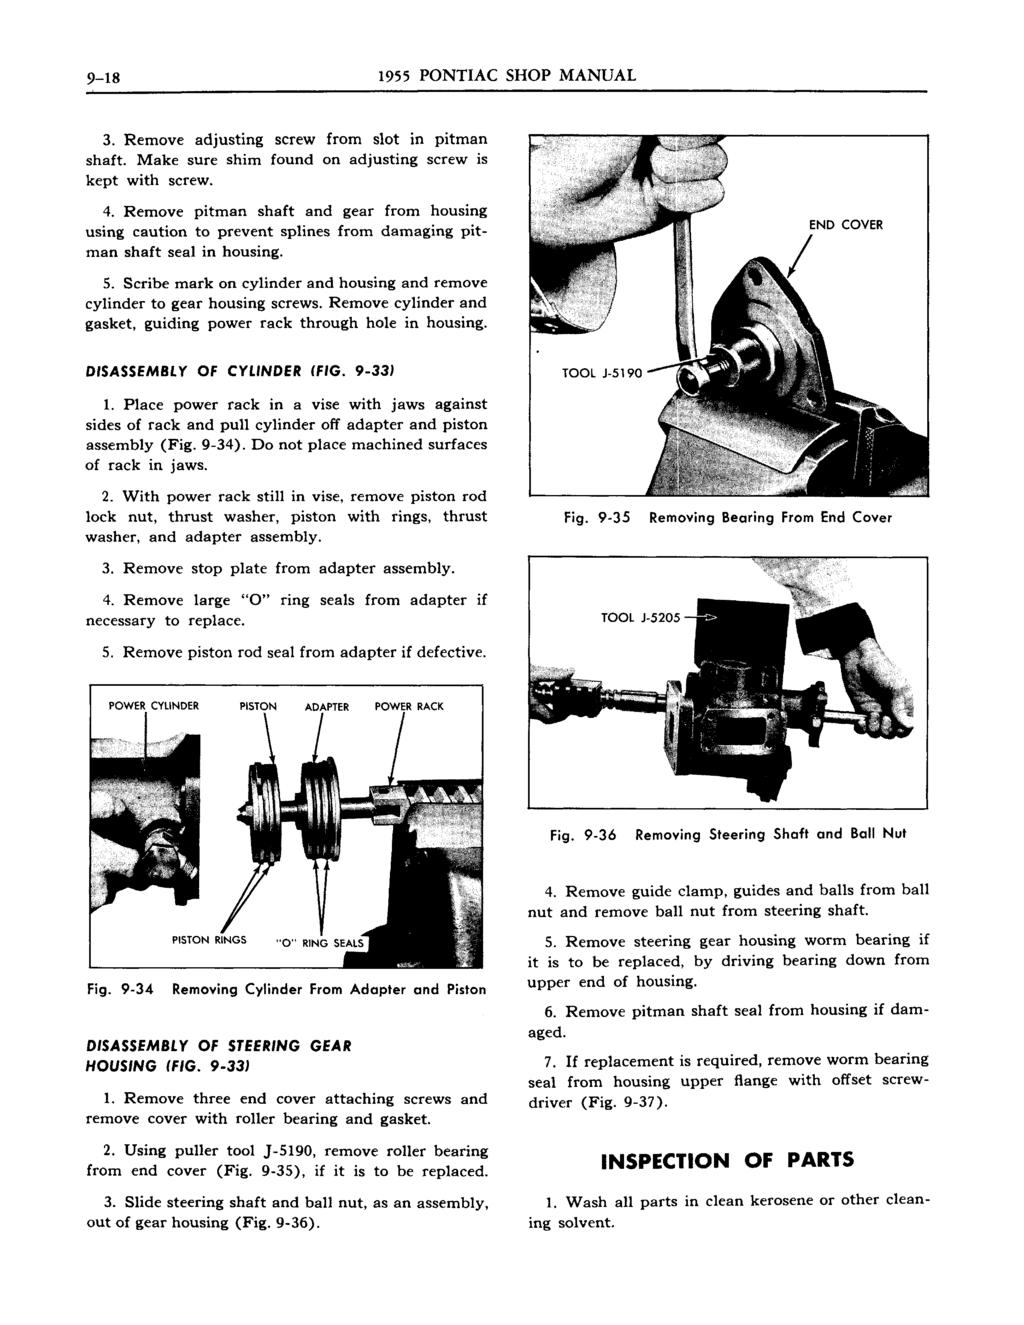 9-18 1955 PONTIAC SHOP MANUAL 3. Remove adjusting screw from slot in pitman shaft. Make sure shim found on adjusting screw is kept with screw. 4.